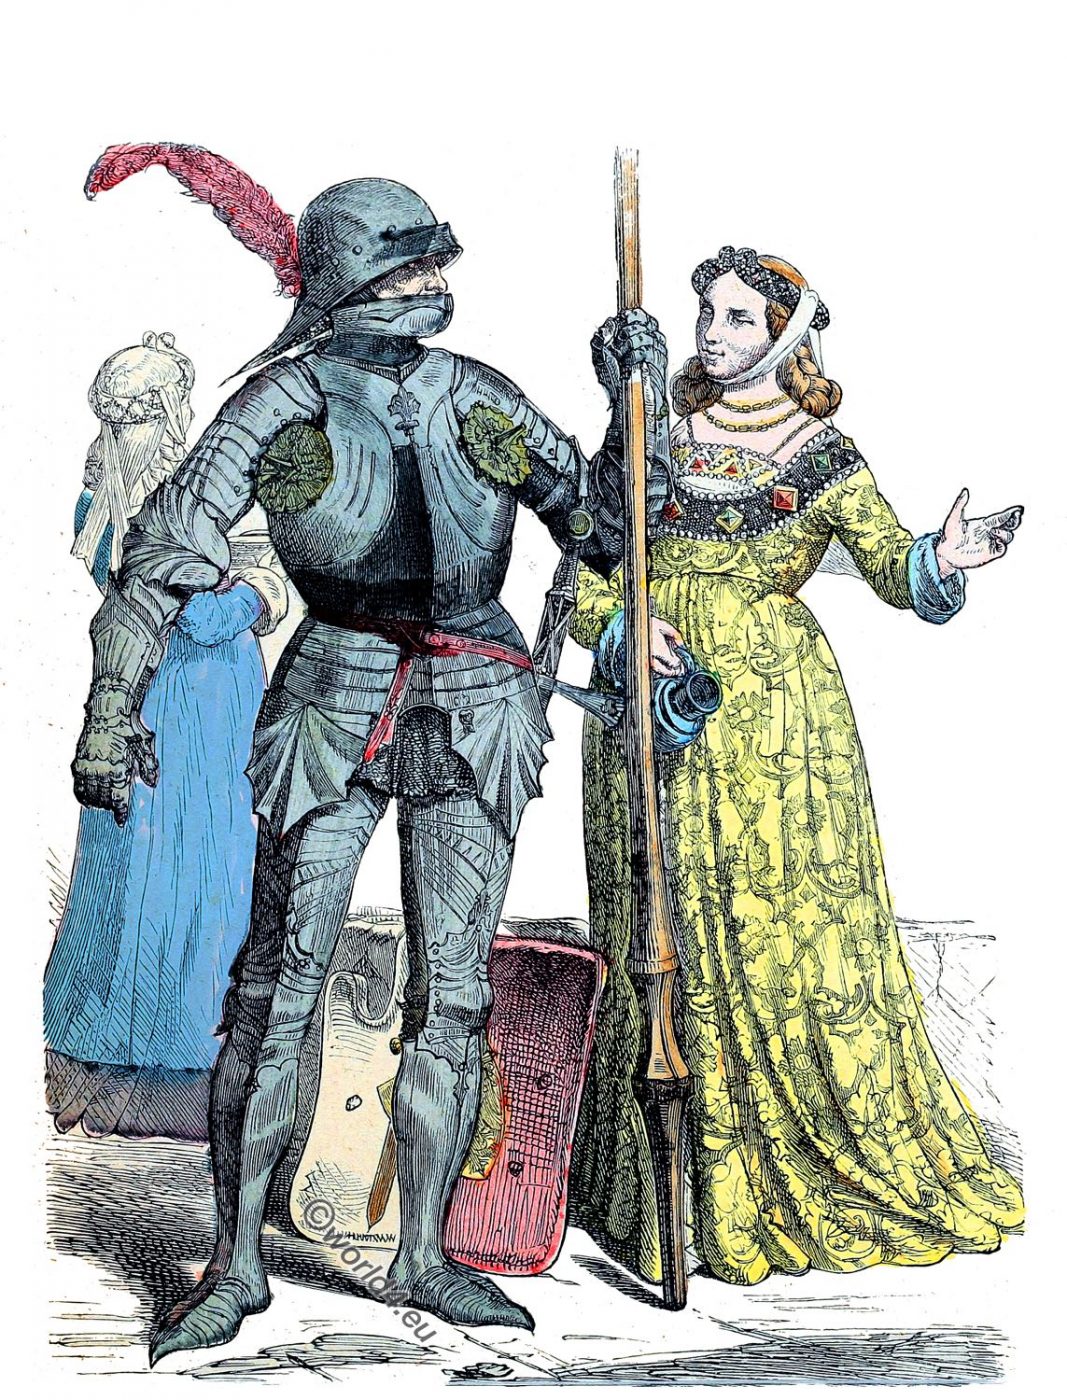 German knight, noblewoman, middle ages, dresses, costume